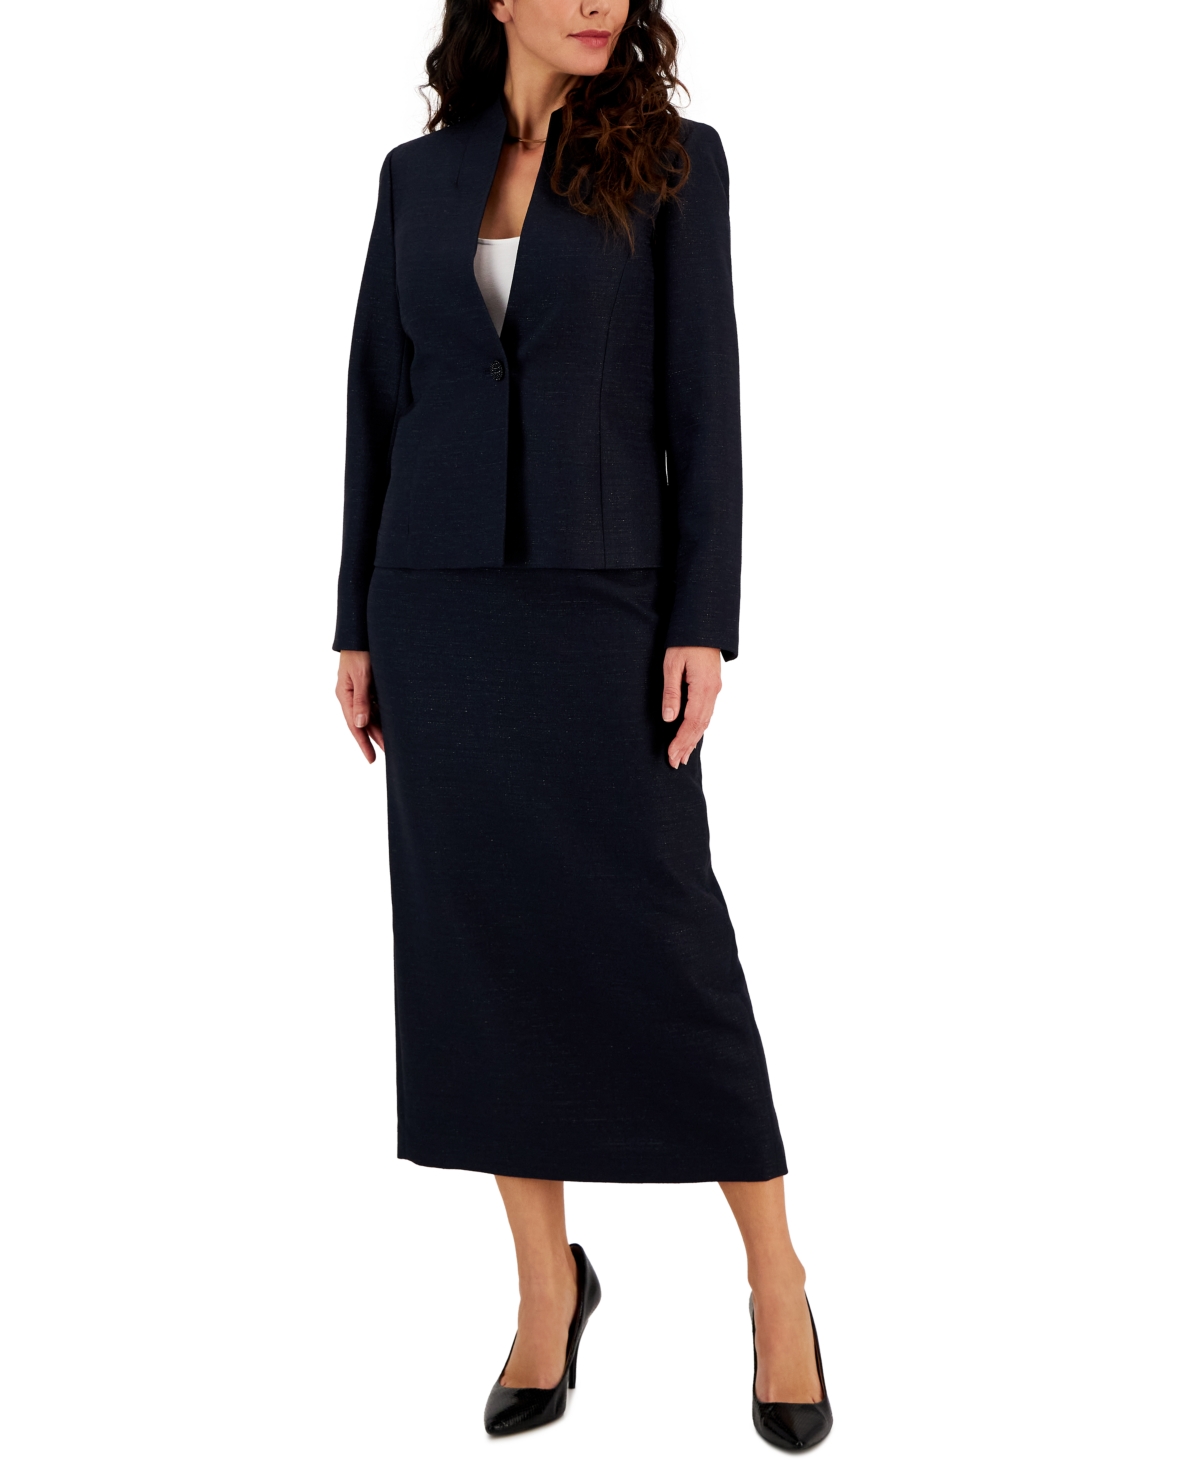 Le Suit Women's Shimmer Tweed Skirt Suit, Regular And Petite Sizes In Navy